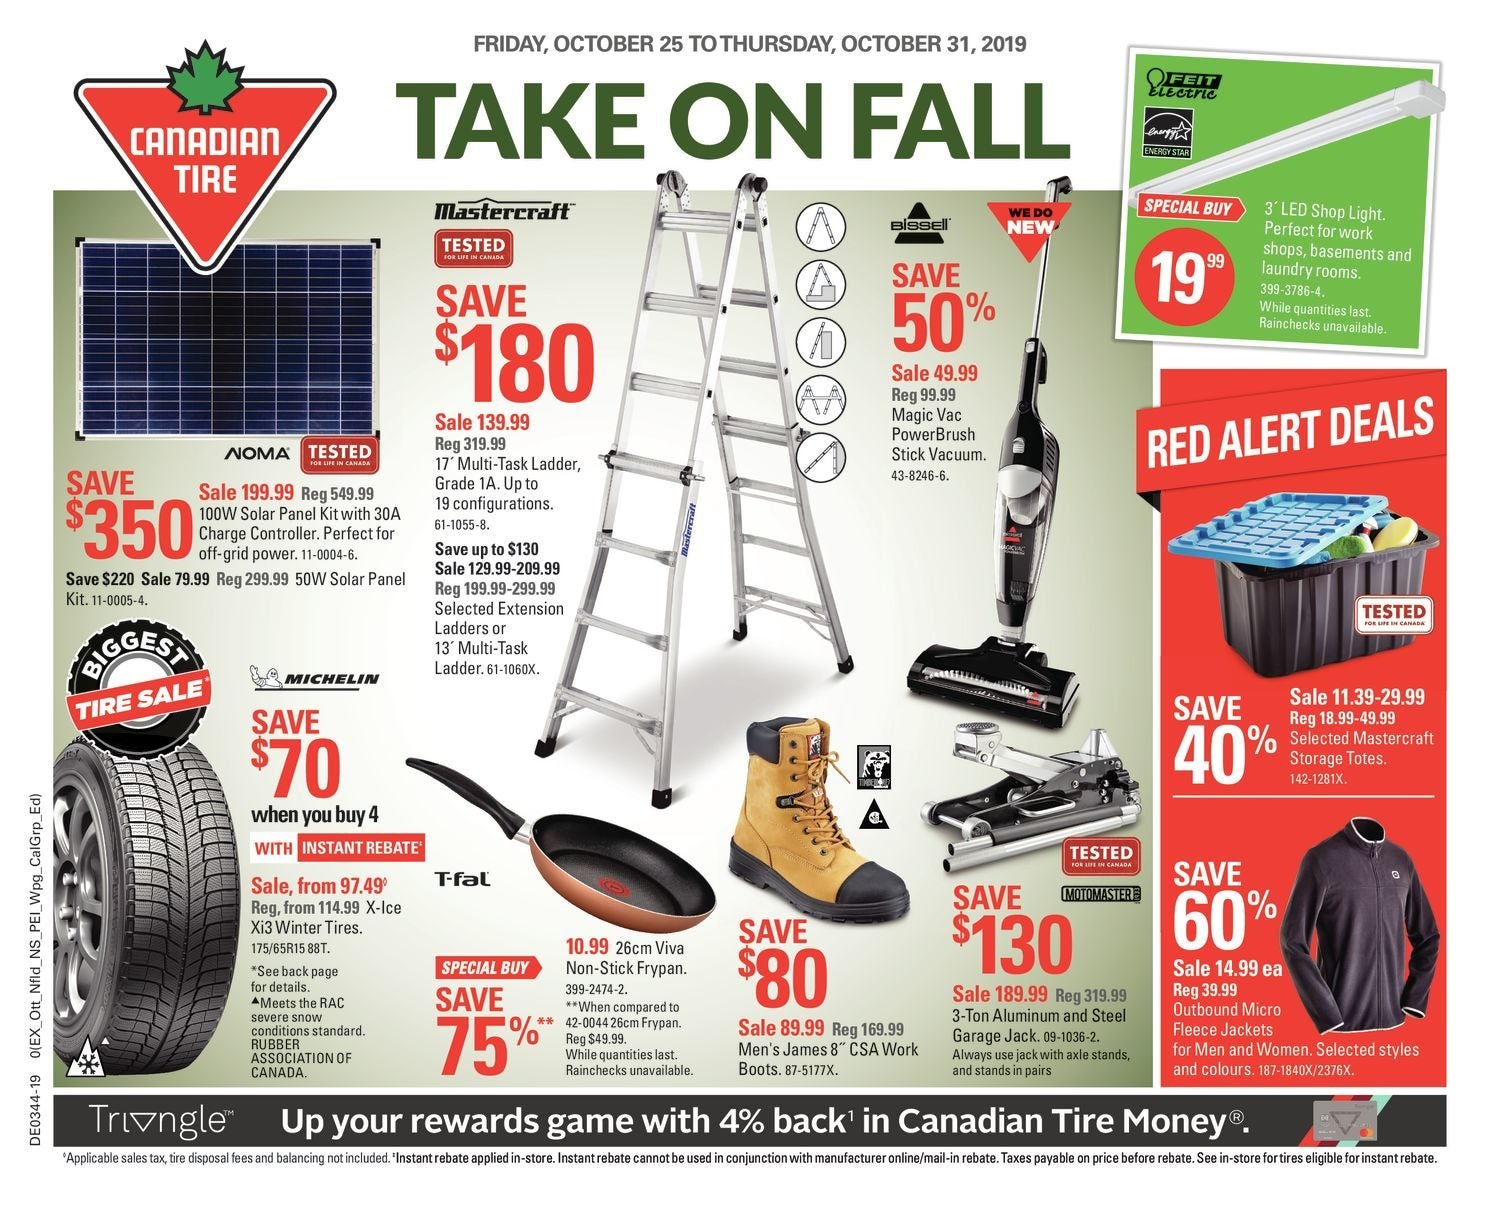 Canadian Tire Weekly Flyer Weekly Take On Fall Oct 25 31